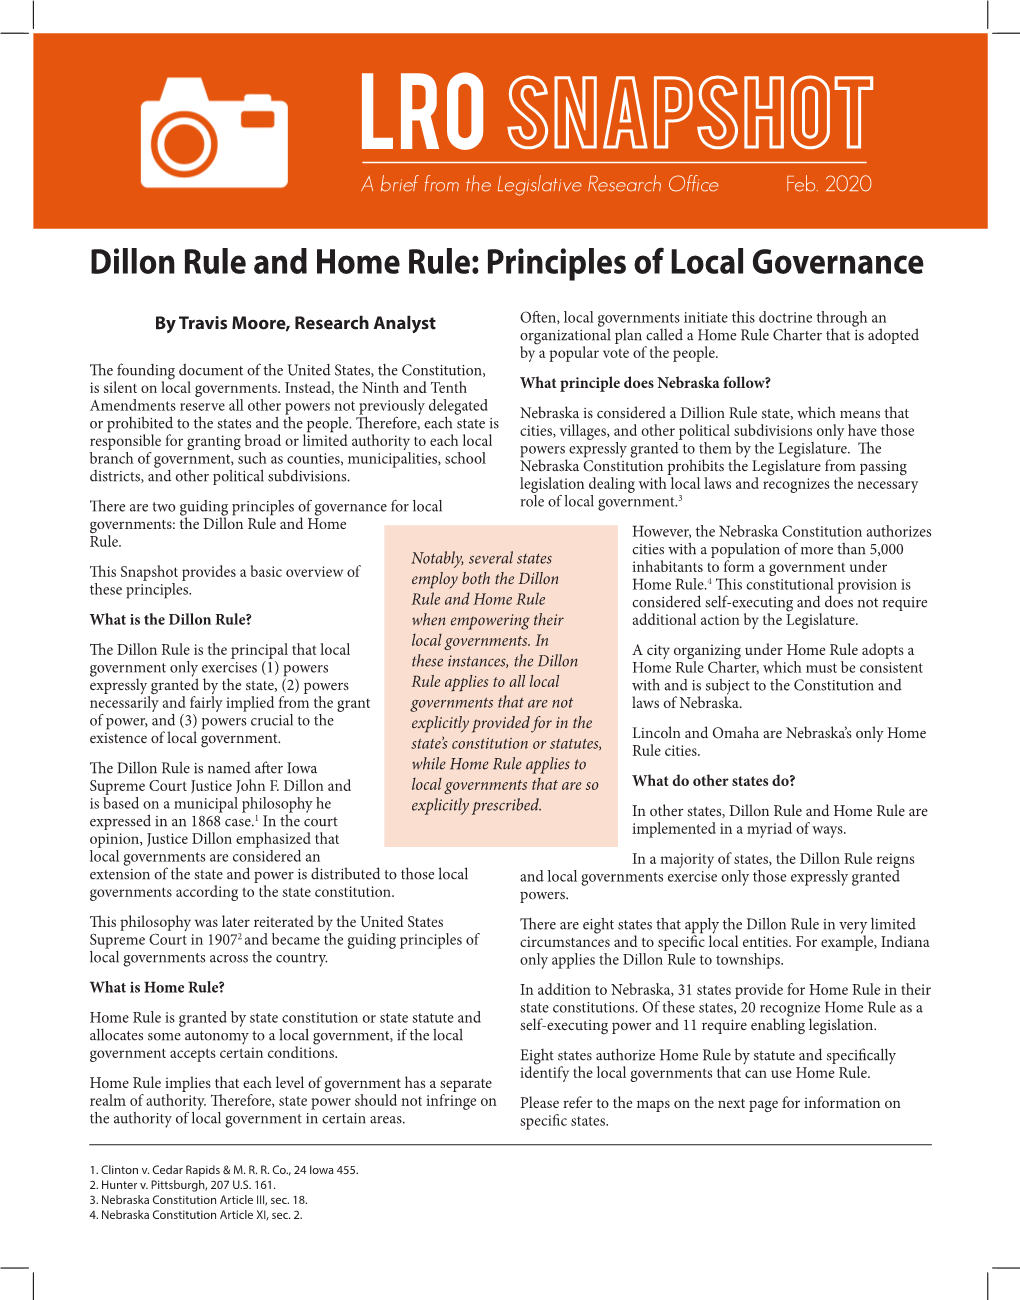 2020 Dillon Rule and Home Rule: Principles of Local Governance